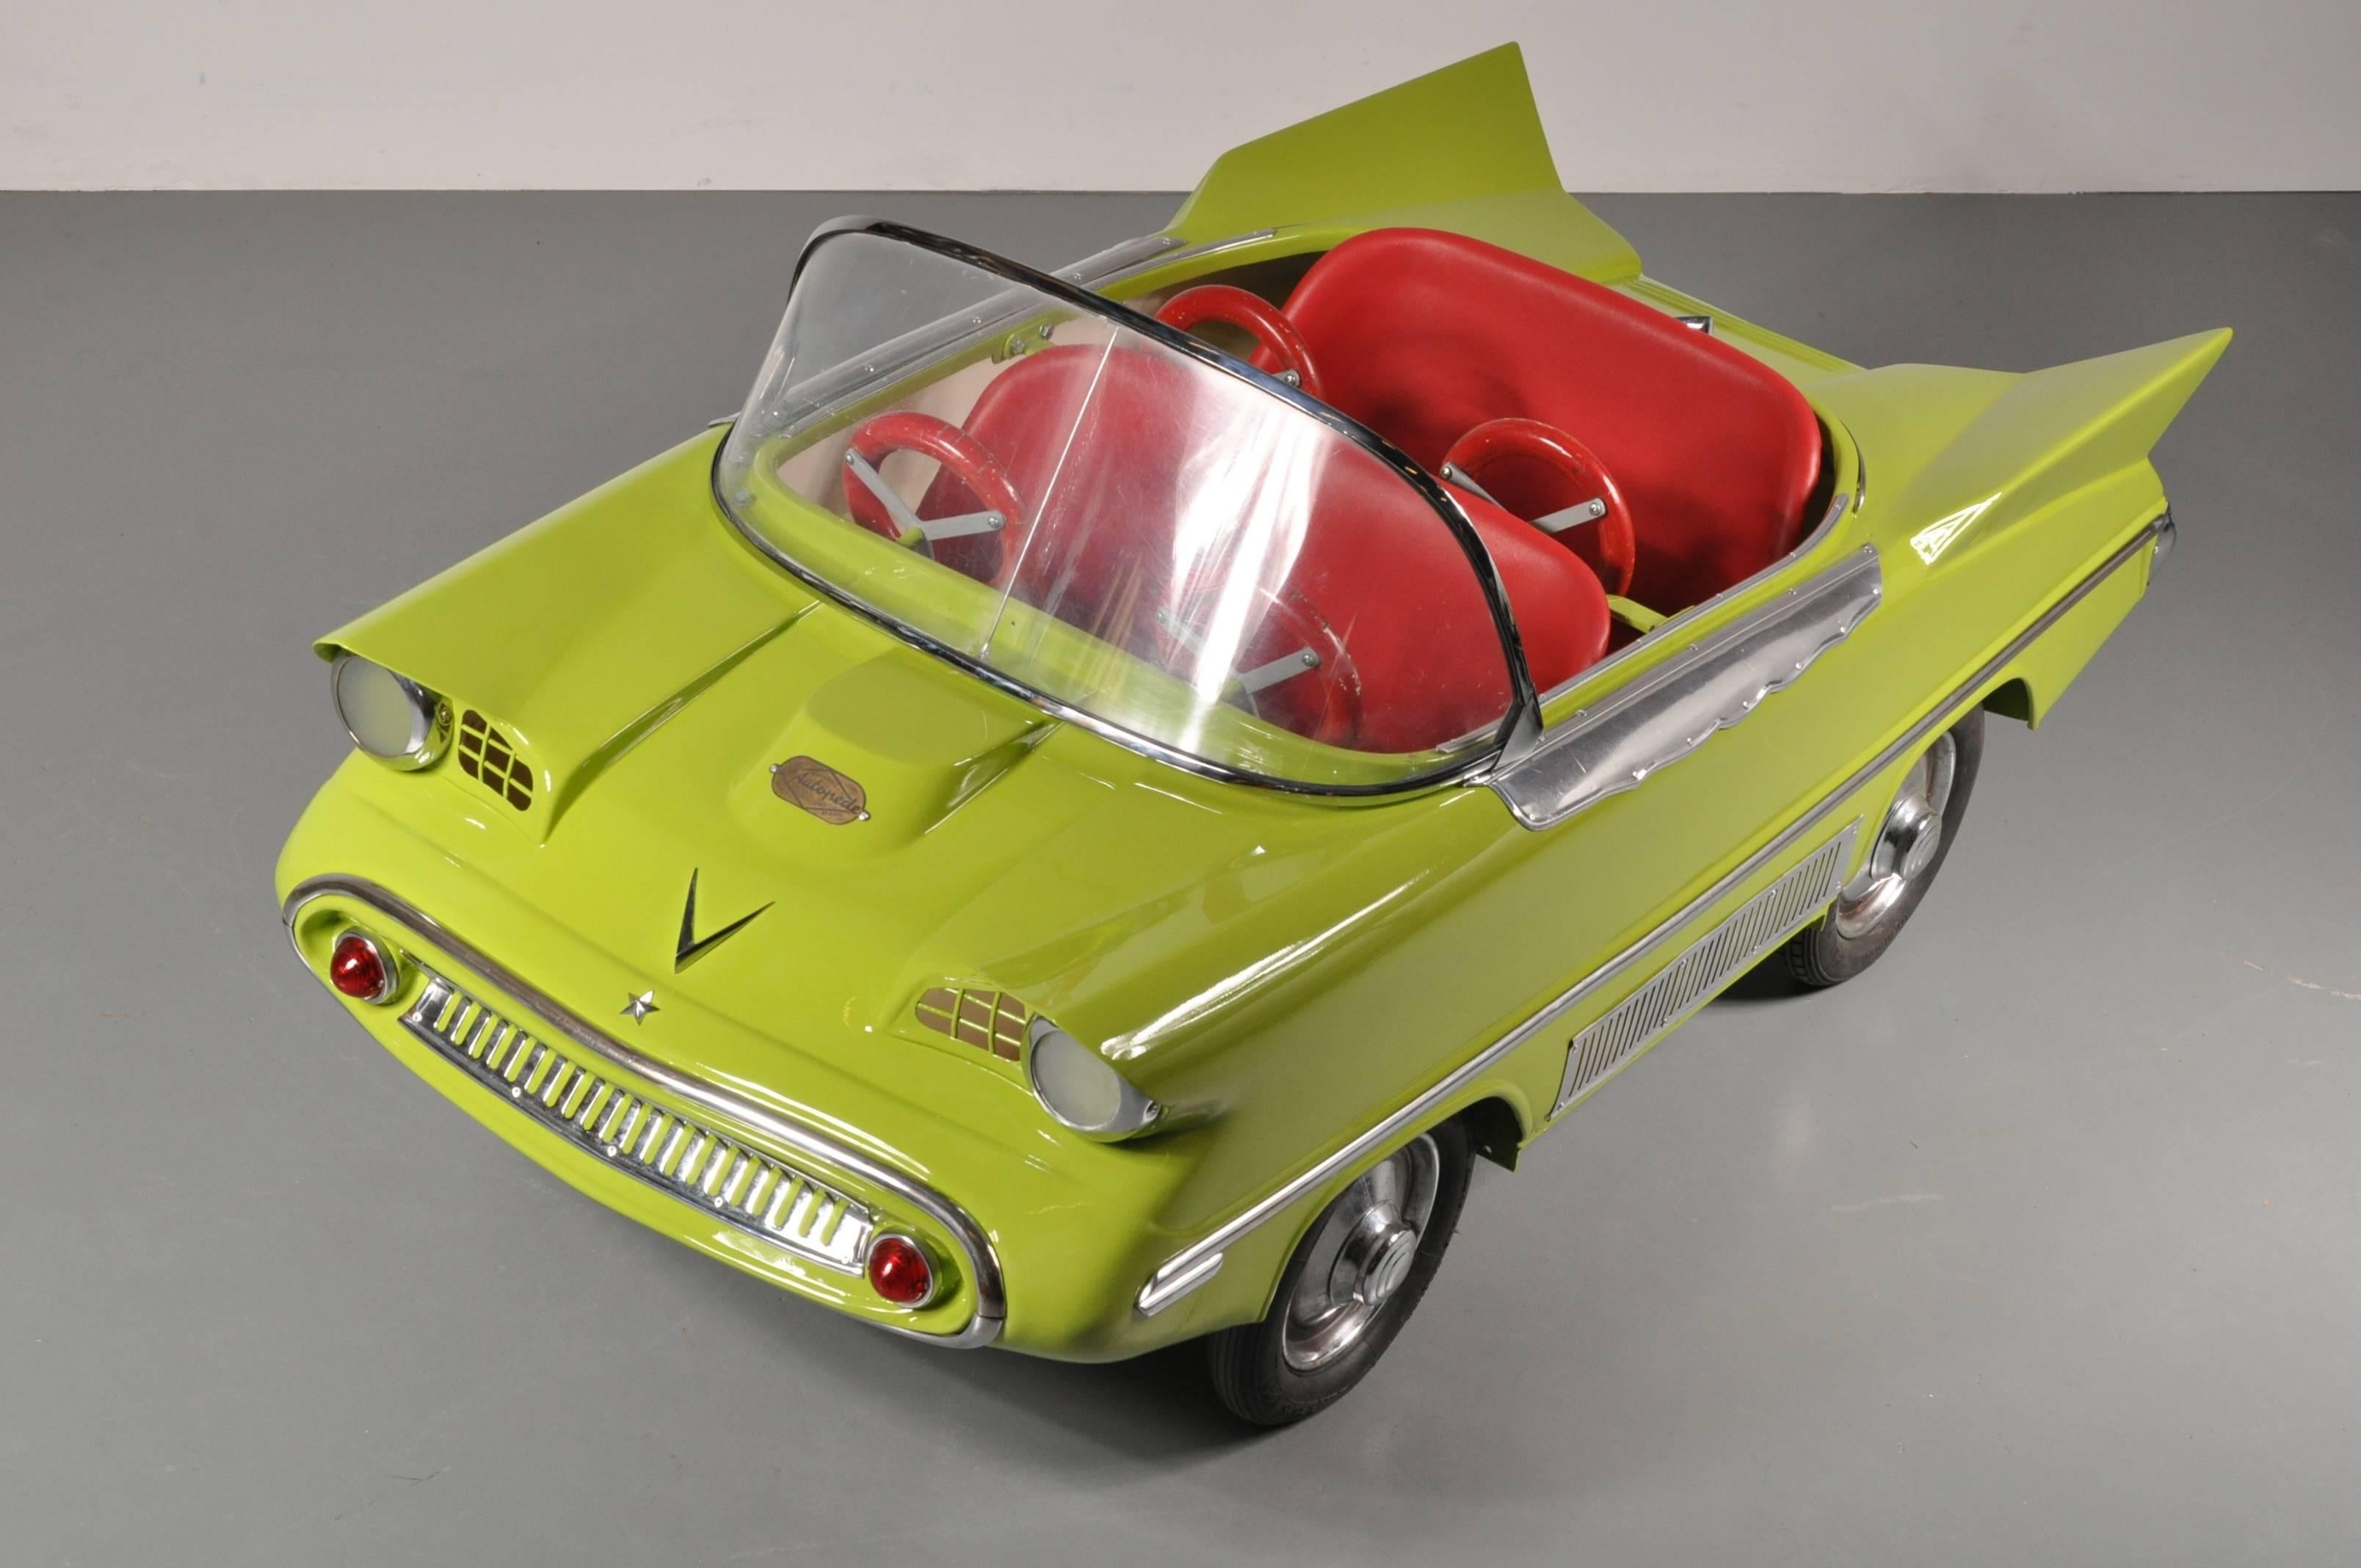 A unique, very rare Lincoln Futura carousel car designed by Karel Baeyens, produced by l'Autopede in Ghent, Belgium, circa 1956.

This eye-catching piece has been beautifully renewed after it's original standards. It is made of metal, painted in a